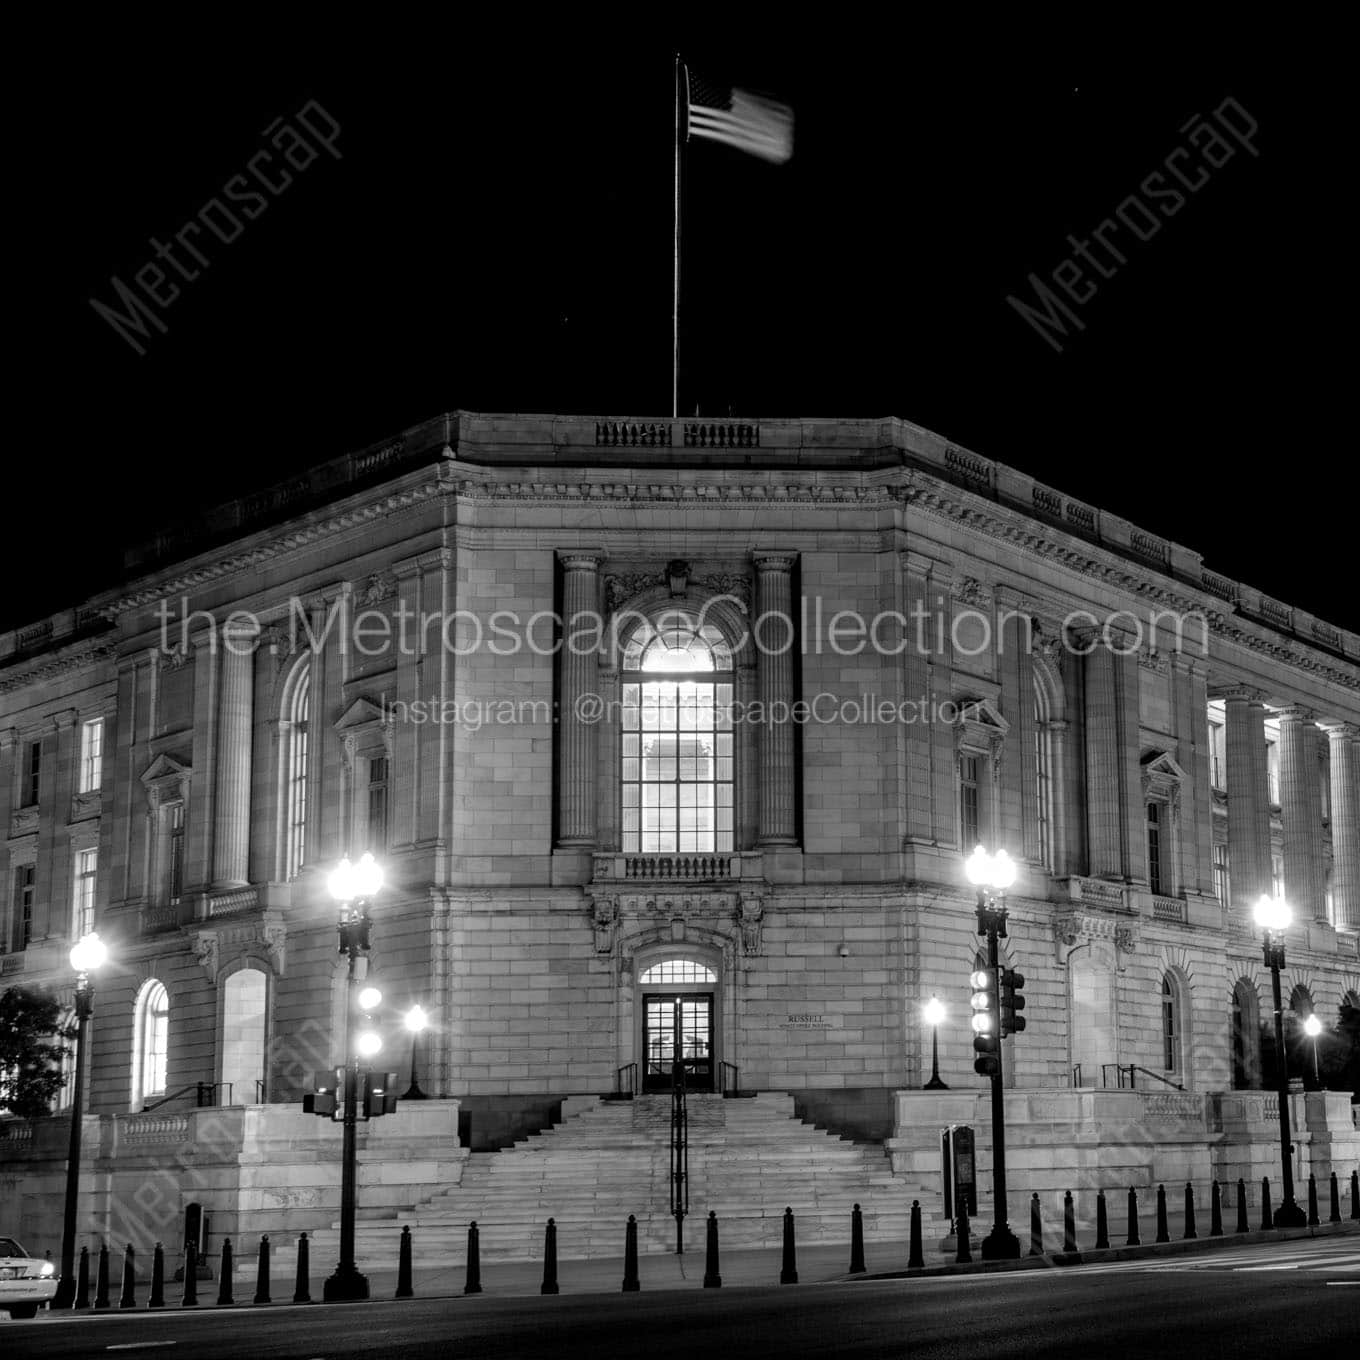 senate russell office building at night Black & White Wall Art